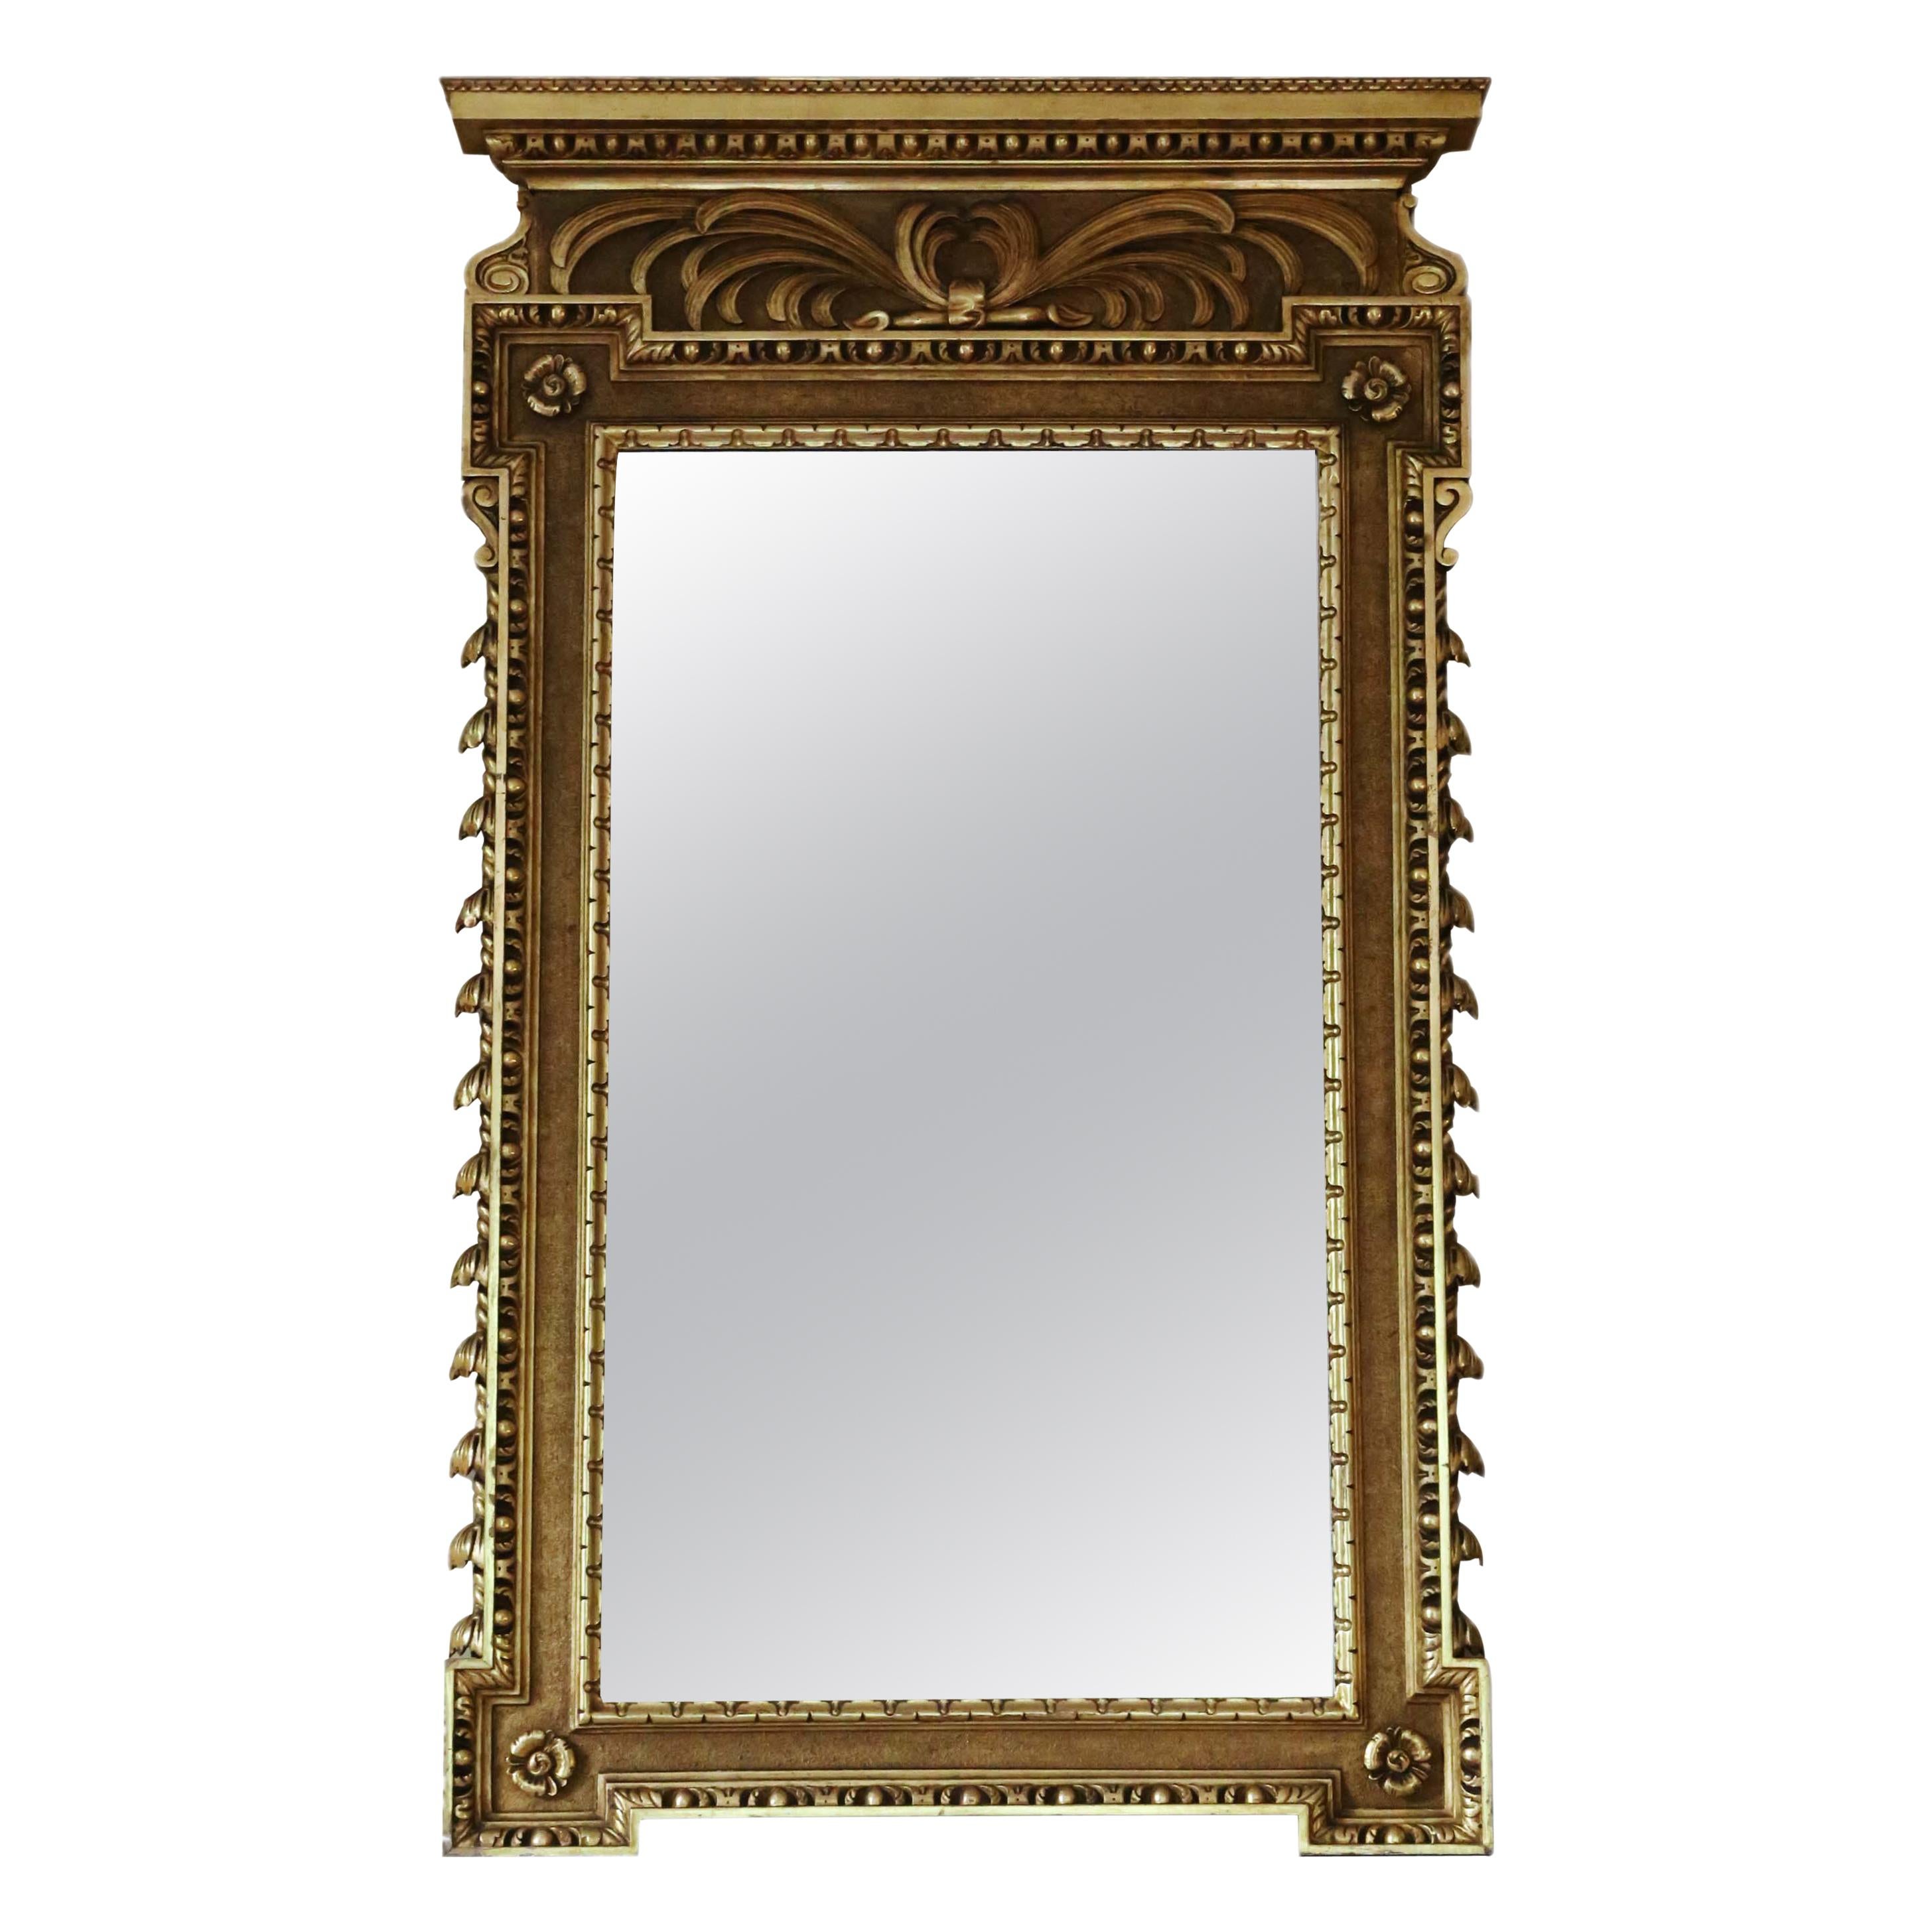 Antique Large Rare Fine Quality Gilt Overmantle or Wall Mirror, circa 1900